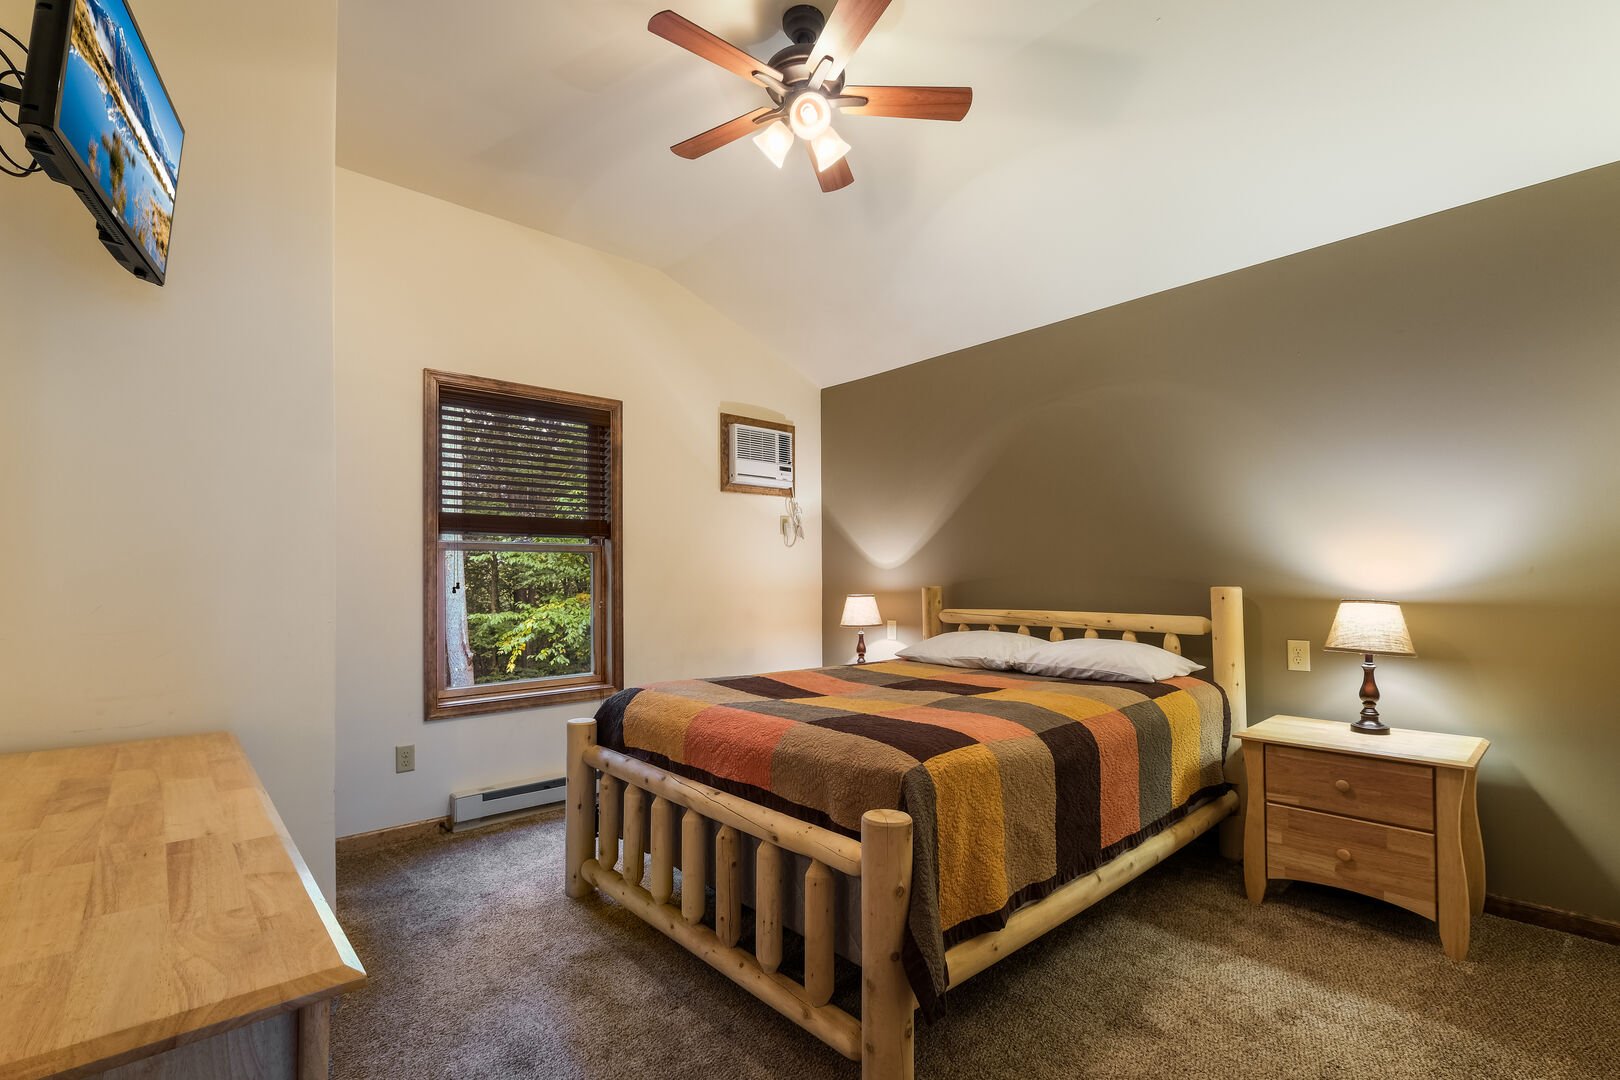 Large bed, nightstands, dresser, and TV of a room in this luxurious Poconos vacation rental.